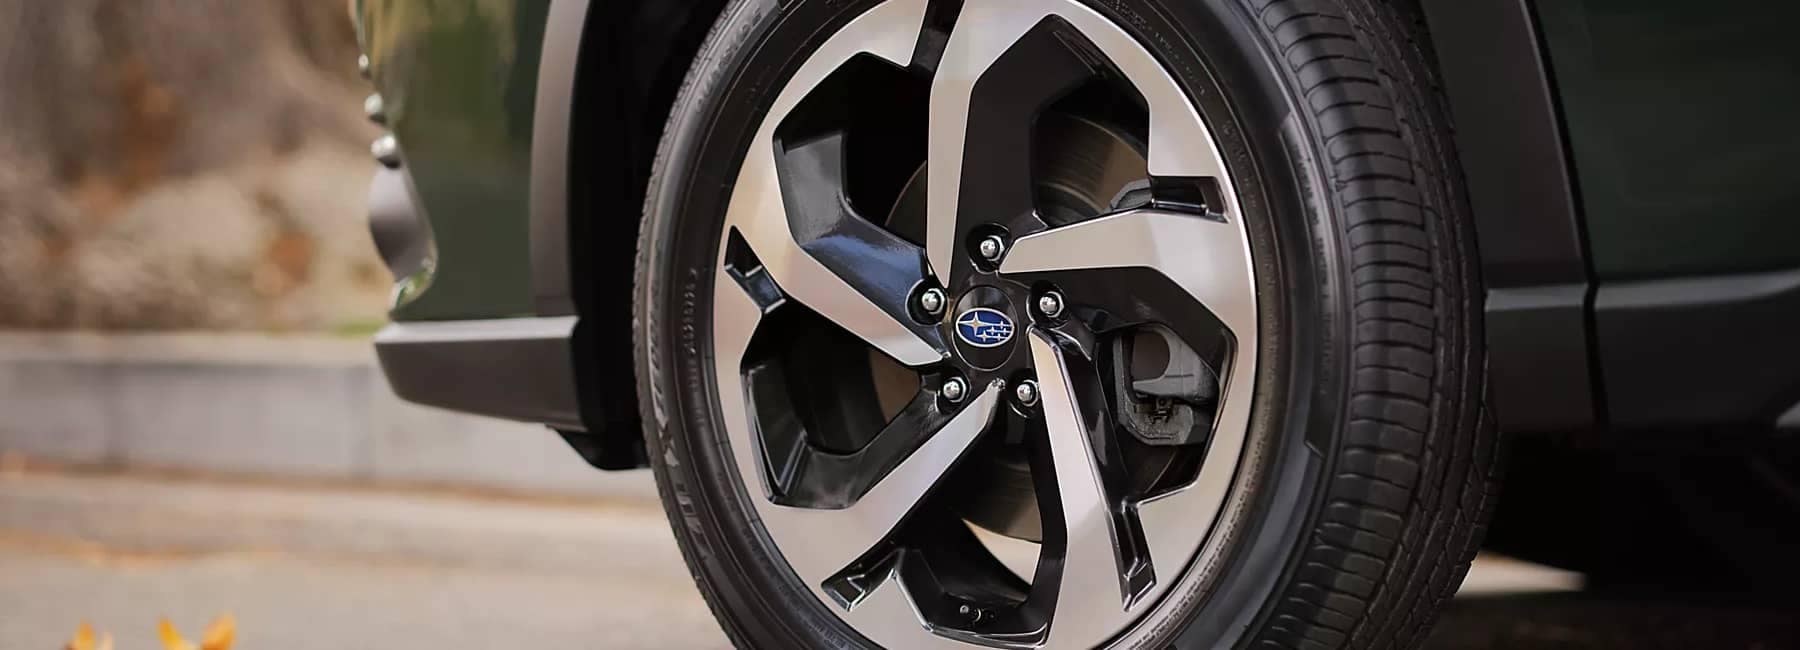 2022 Subaru Foreste closeup view of the front tire at an angle